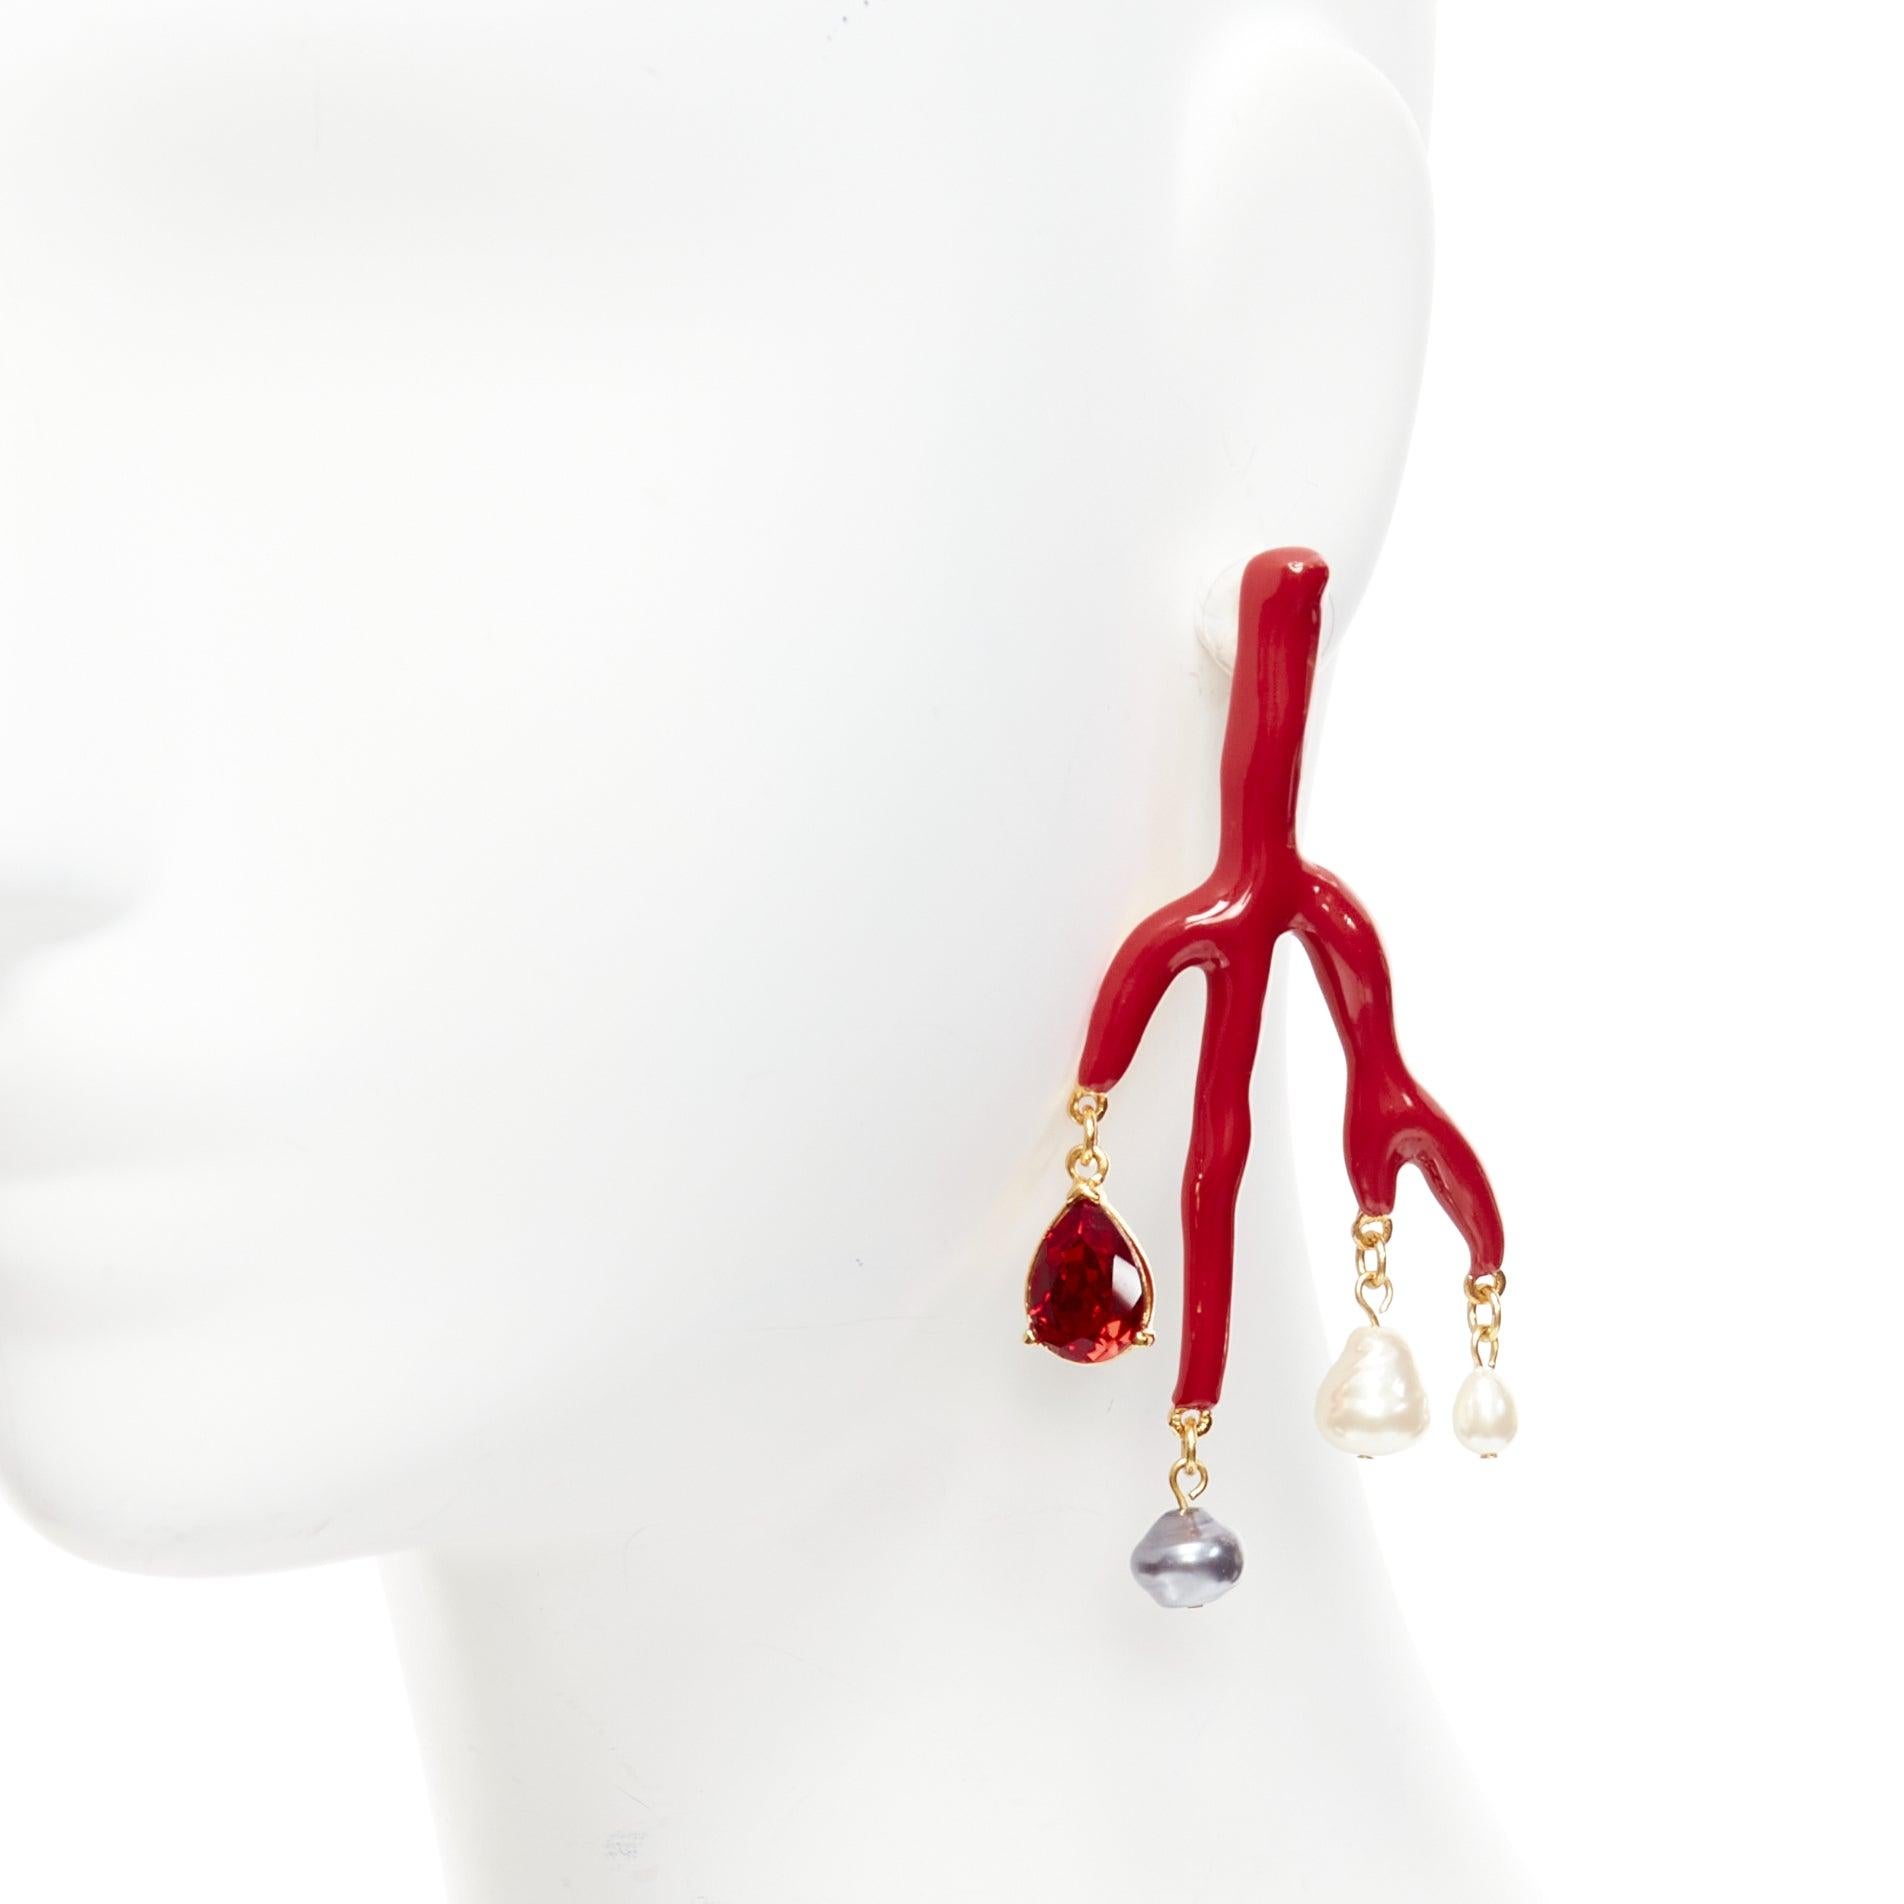 OSCAR DE LA RENTA red coral branch metal crystal faux pearl droplet pin earrings pair
Reference: AAWC/A01072
Brand: Oscar de la Renta
Material: Metal, Faux Pearl
Color: Gold, Red
Pattern: Solid
Closure: Pin
Lining: Gold Metal
Made in: United